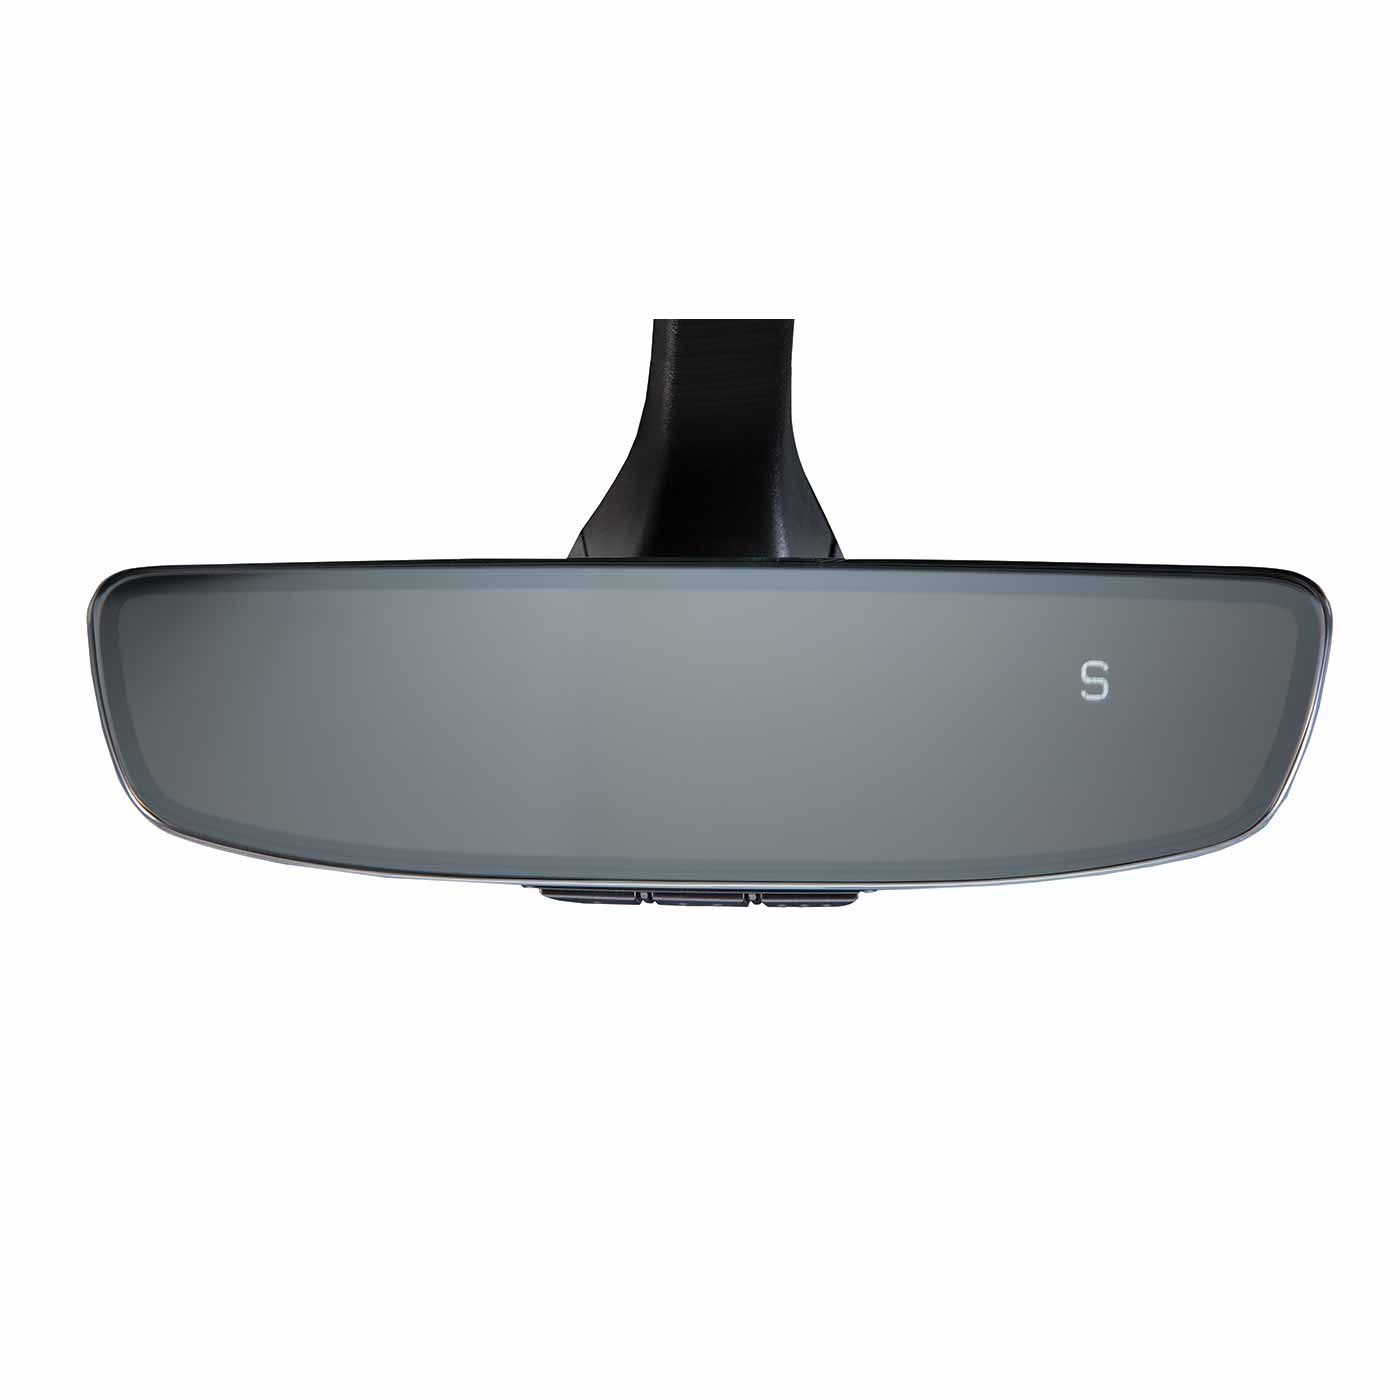 VW Enhanced Rearview Mirror with HomeLink®